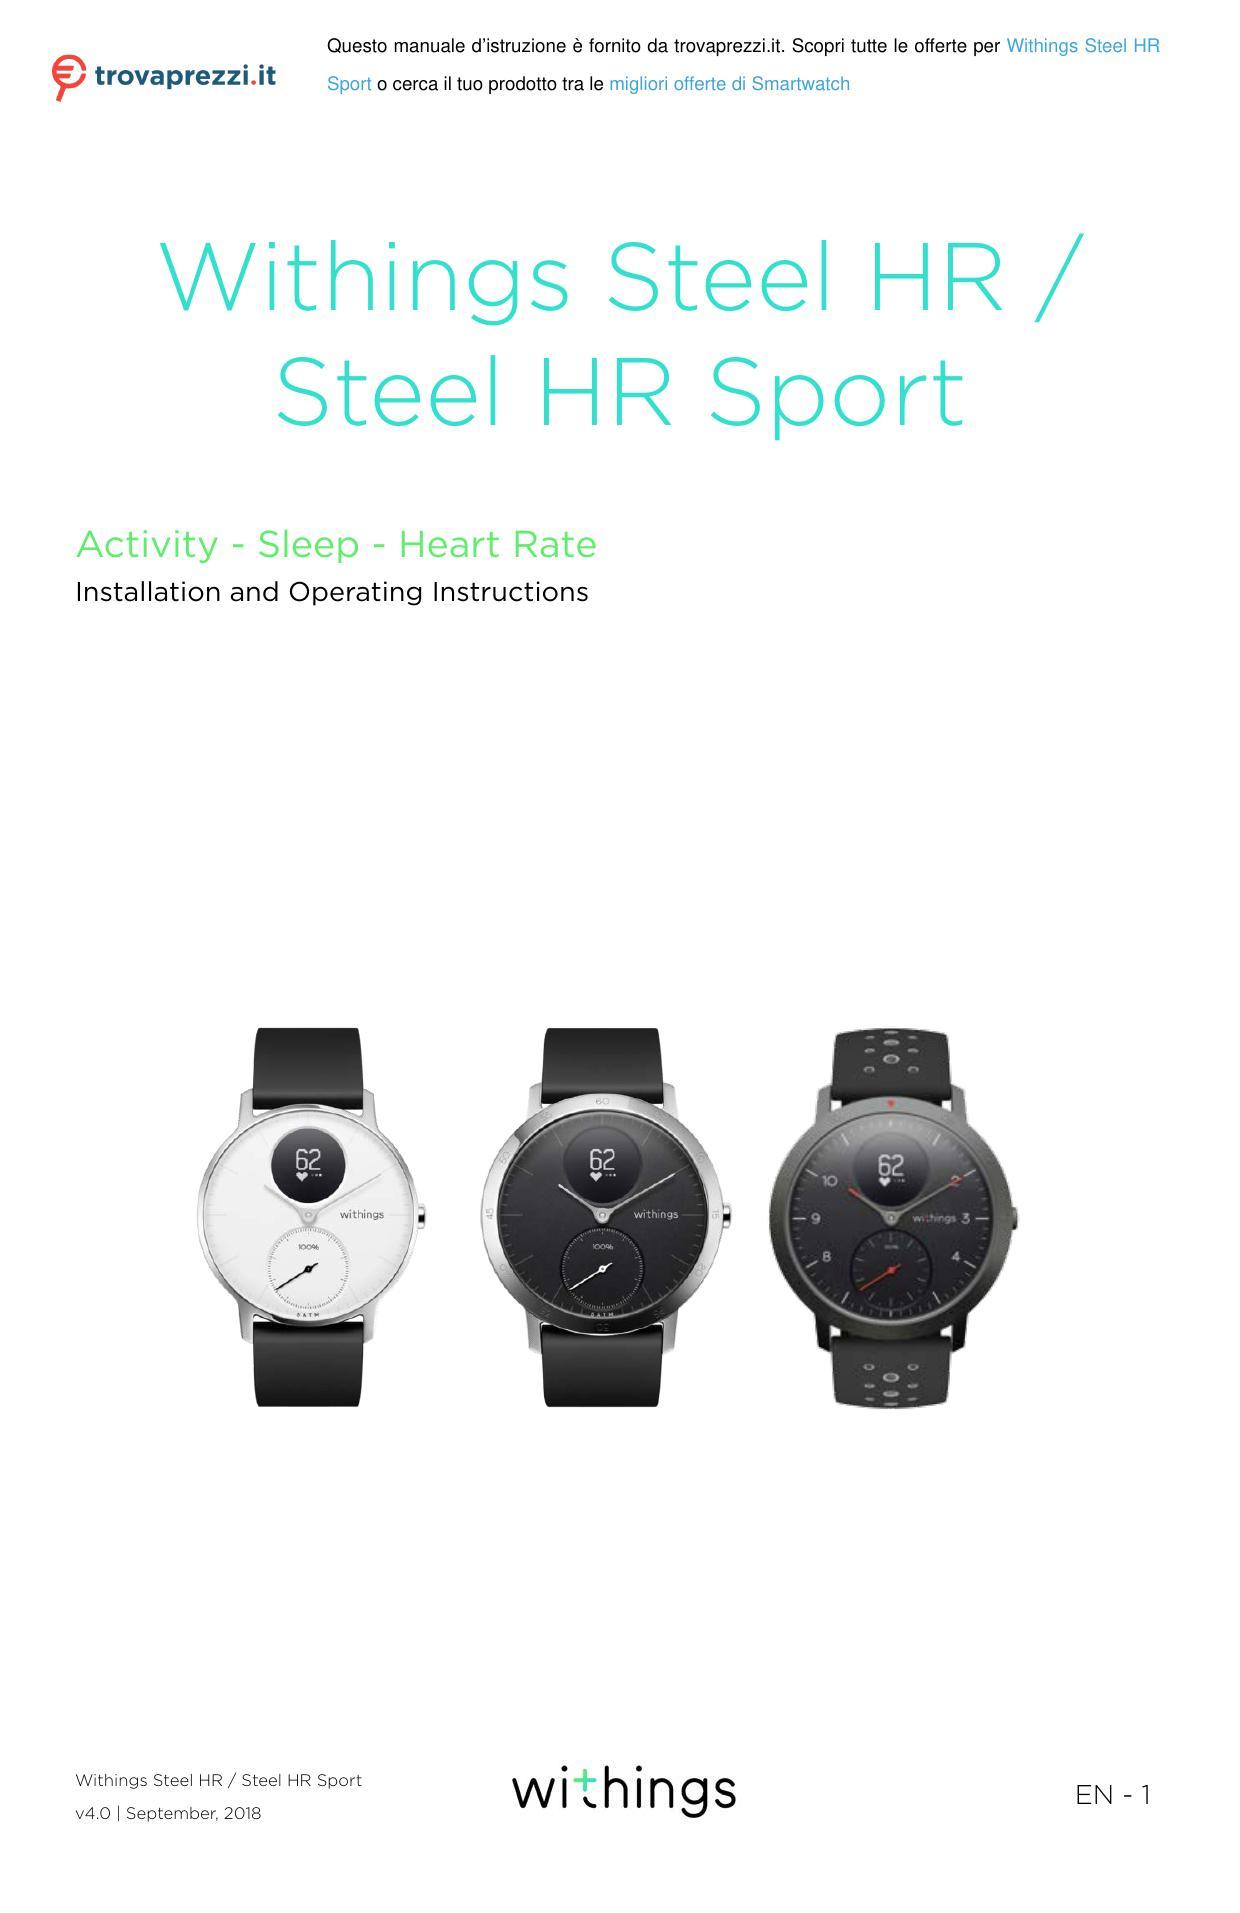 activity-sleep-heart-rate-installation-and-operating-instructions-for-withings-steel-hr-steel-hr-sport.pdf